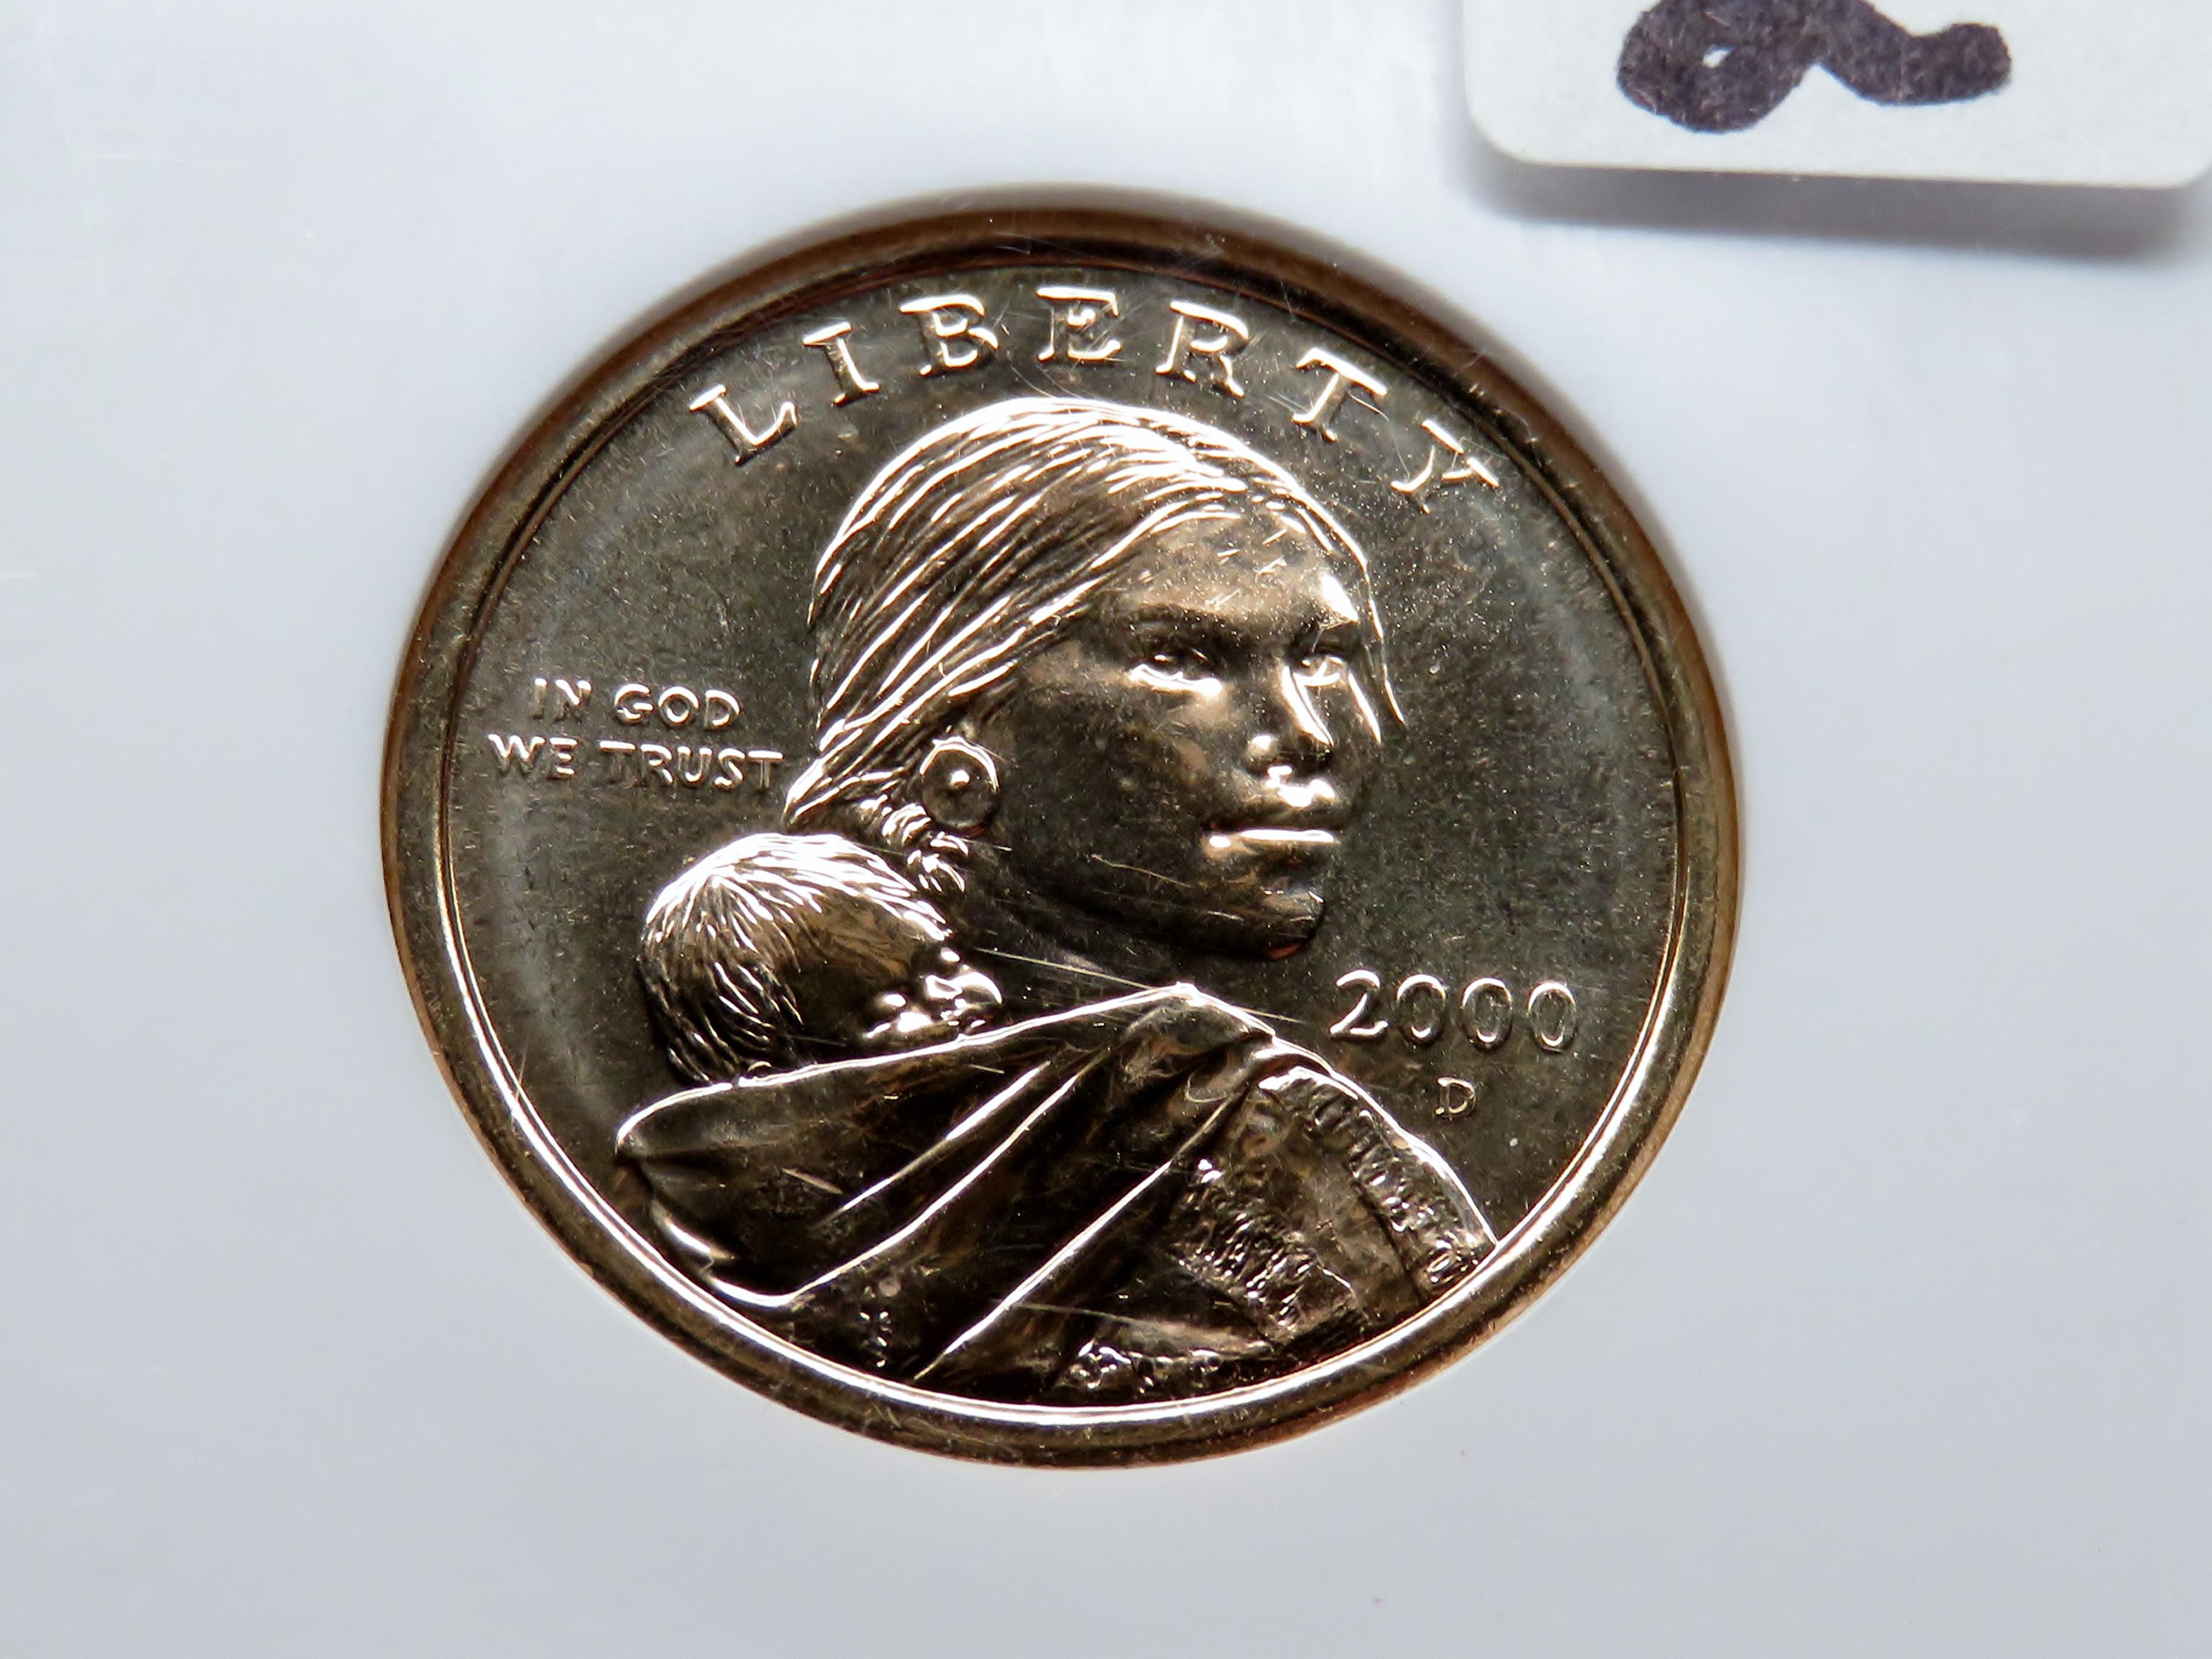 Sacagawea $ 2000D Burnished from Millennium Set NGC MS66 PL